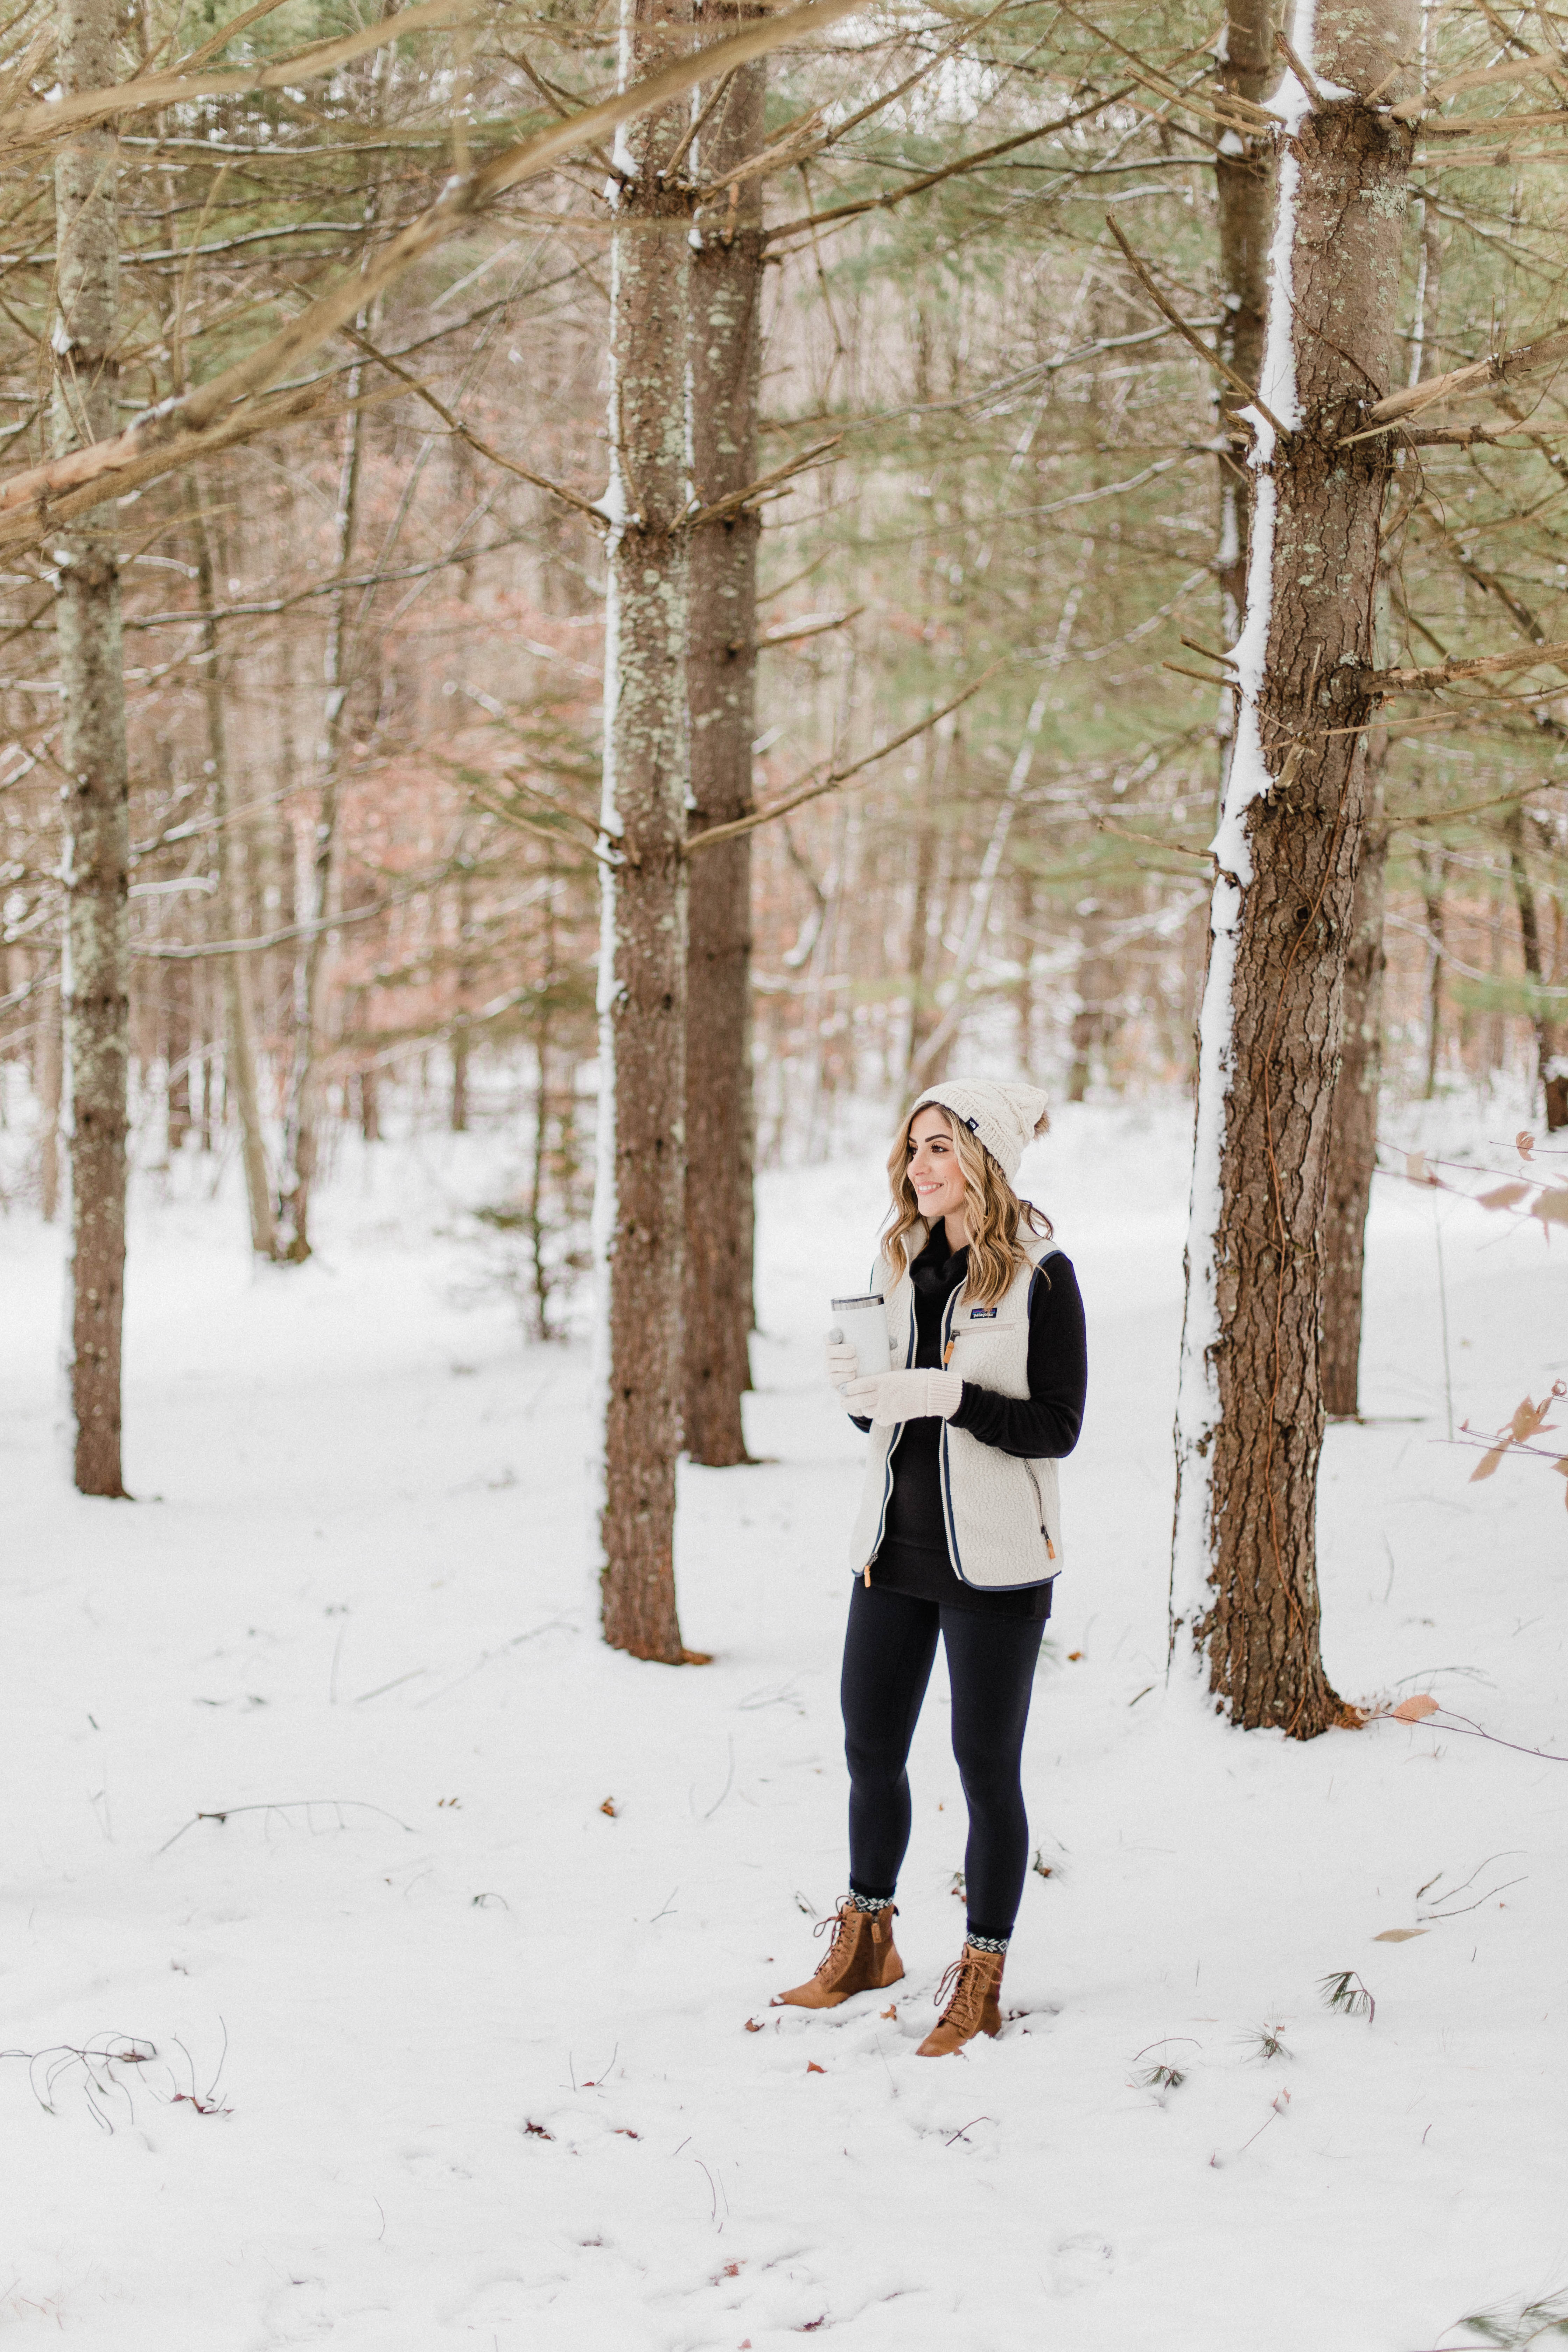 Connecticut life and style blogger Lauren McBride shares a winter gear gift guide featuring a variety of winter items from Backcountry.